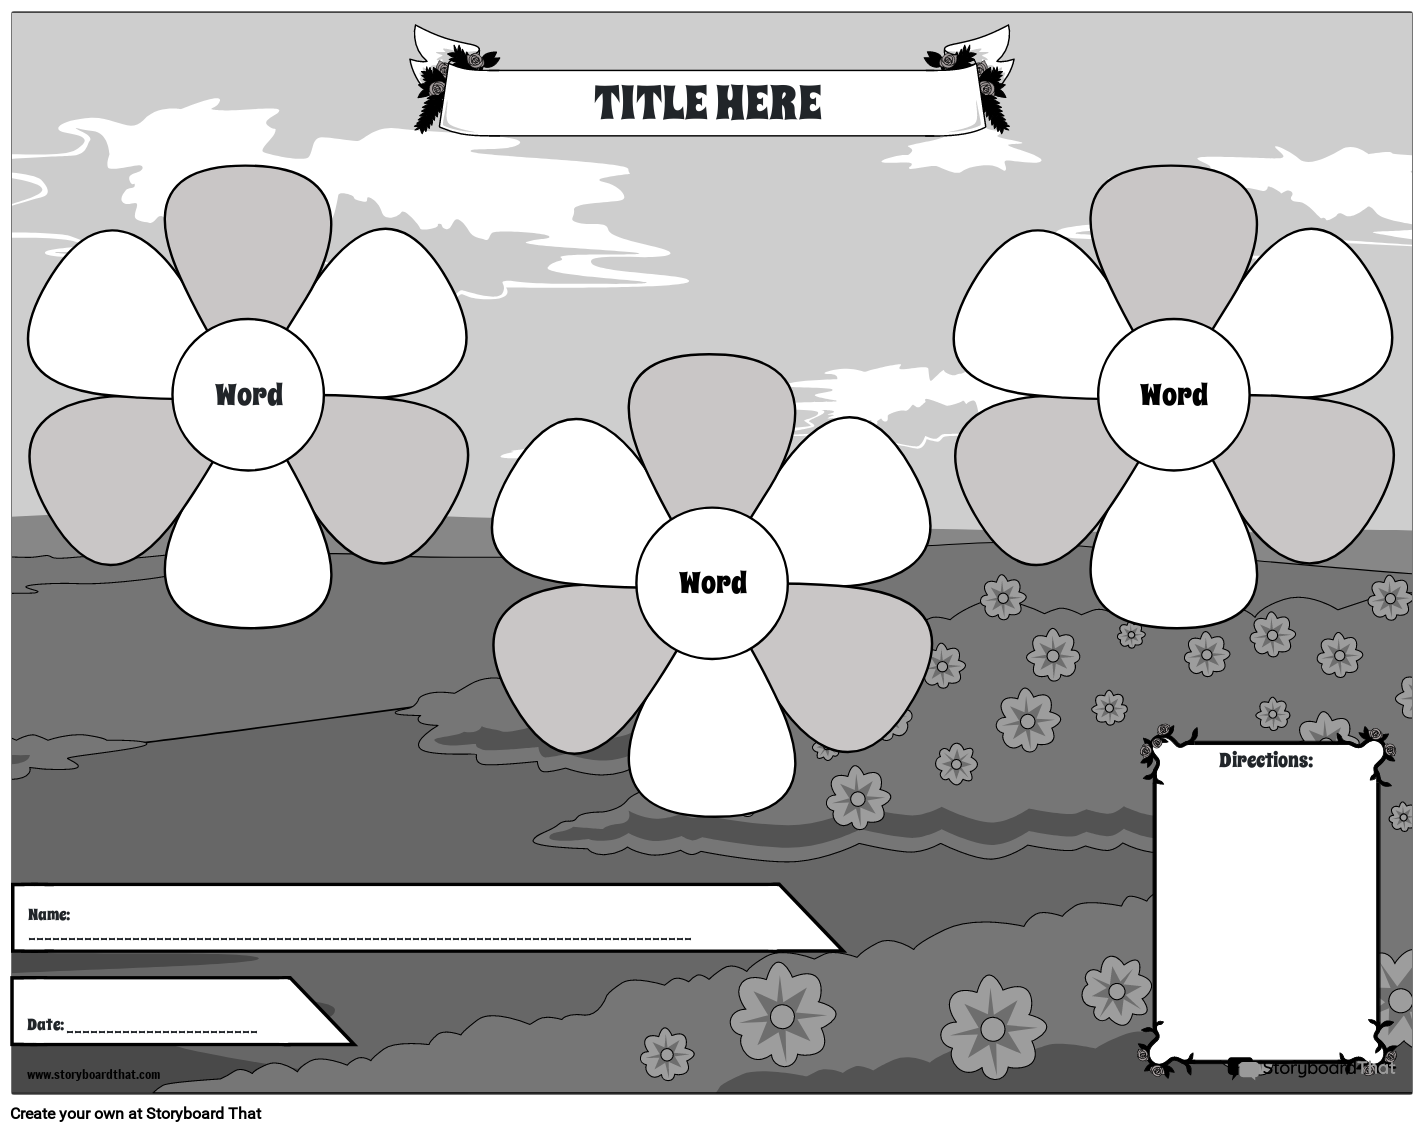 Type of Verbs Flower Diagram Black and White